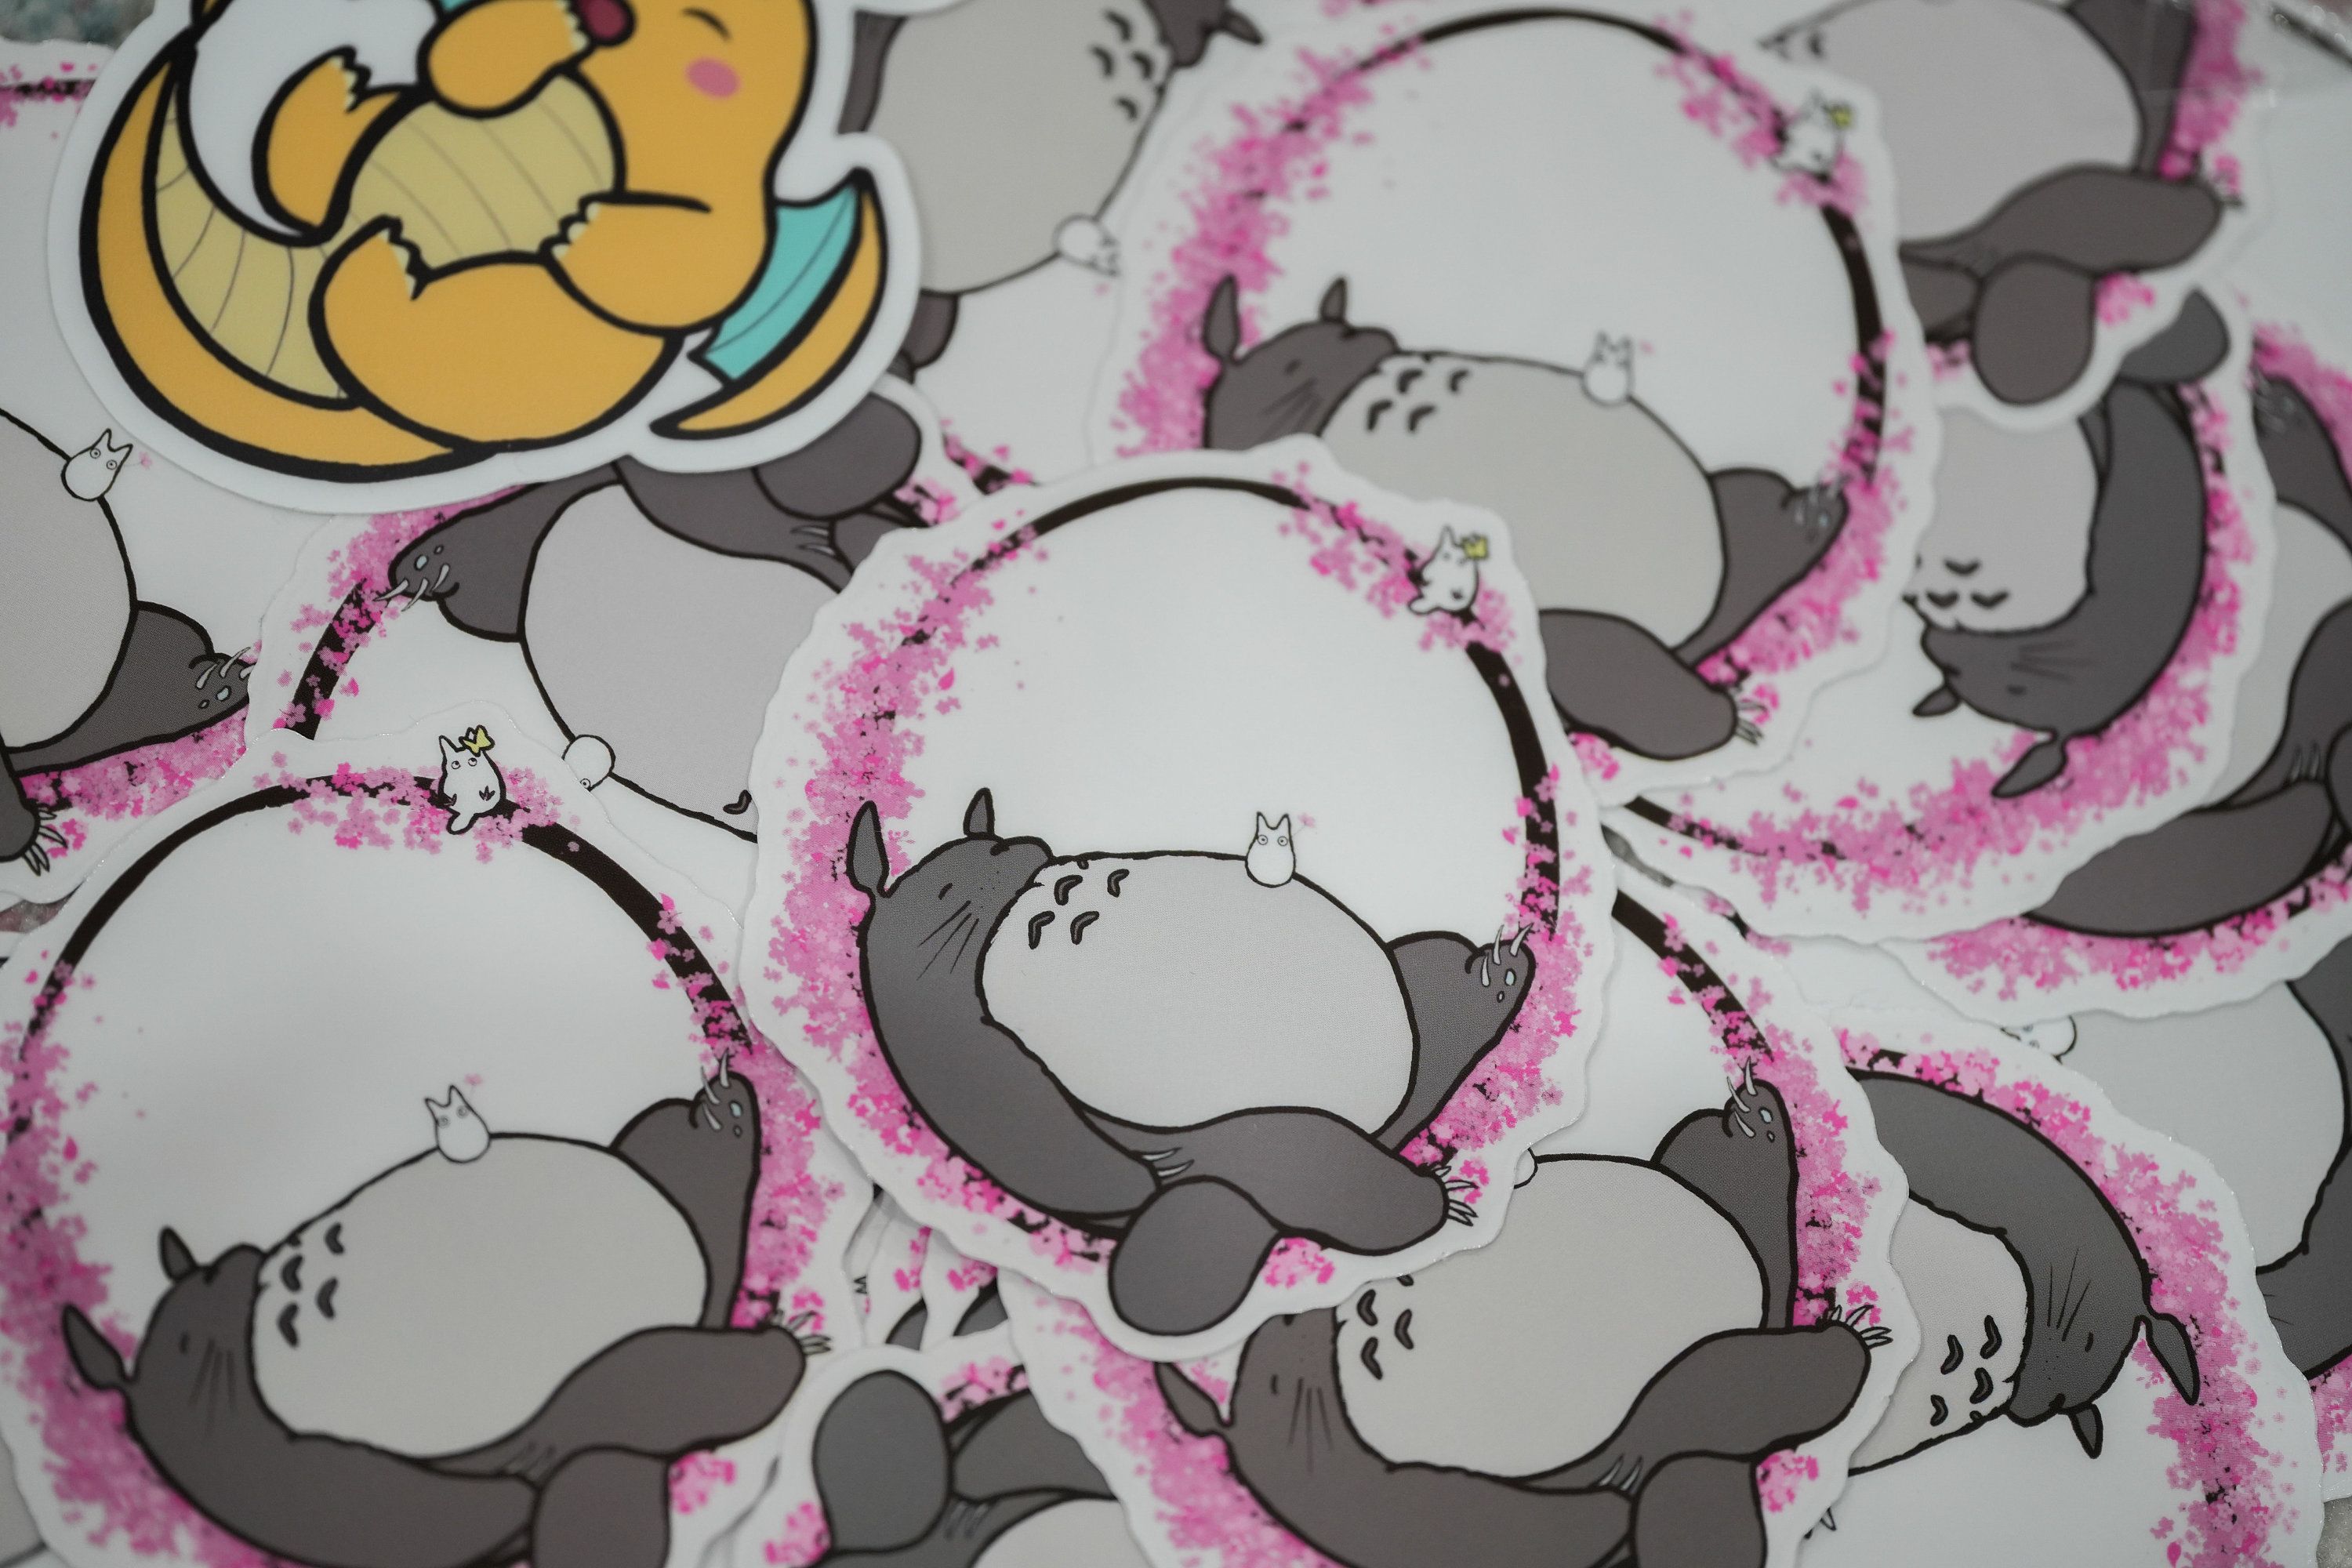 A pile of round stickers with a black cat sleeping on a pile of pink flowers - My Neighbor Totoro